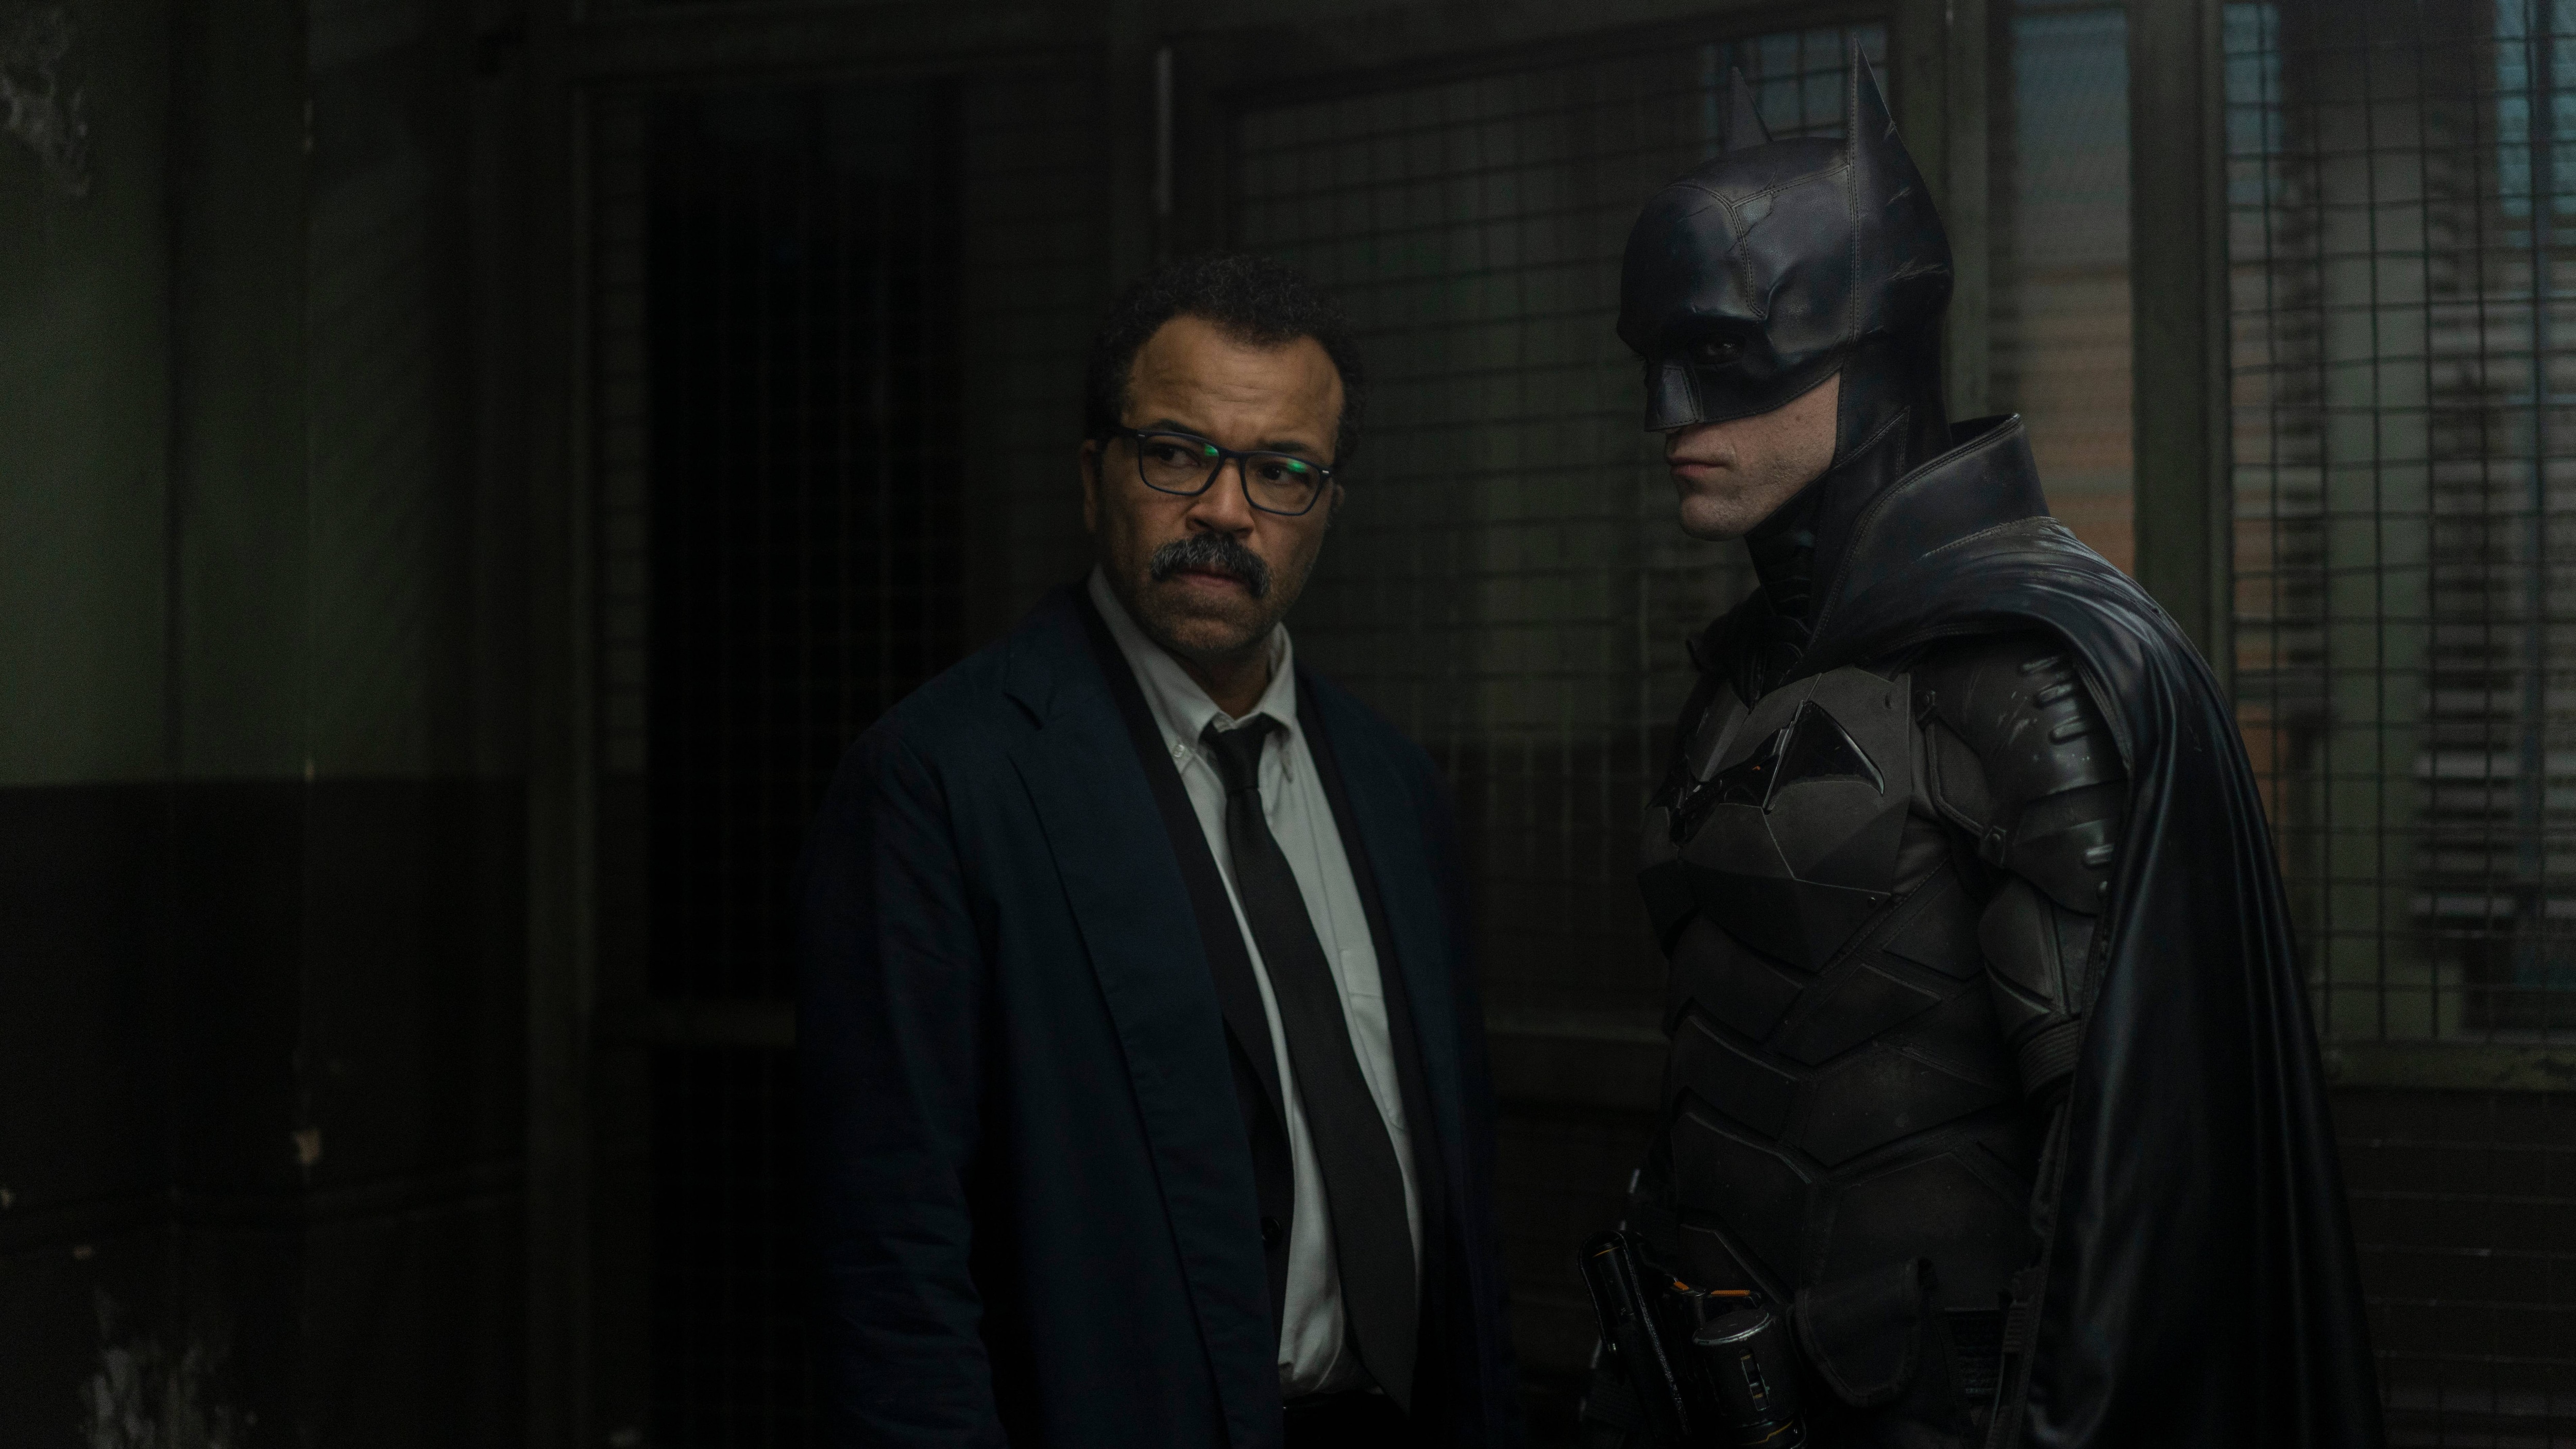 As 'Batman' has changed over the years, so has Commissioner Gordon